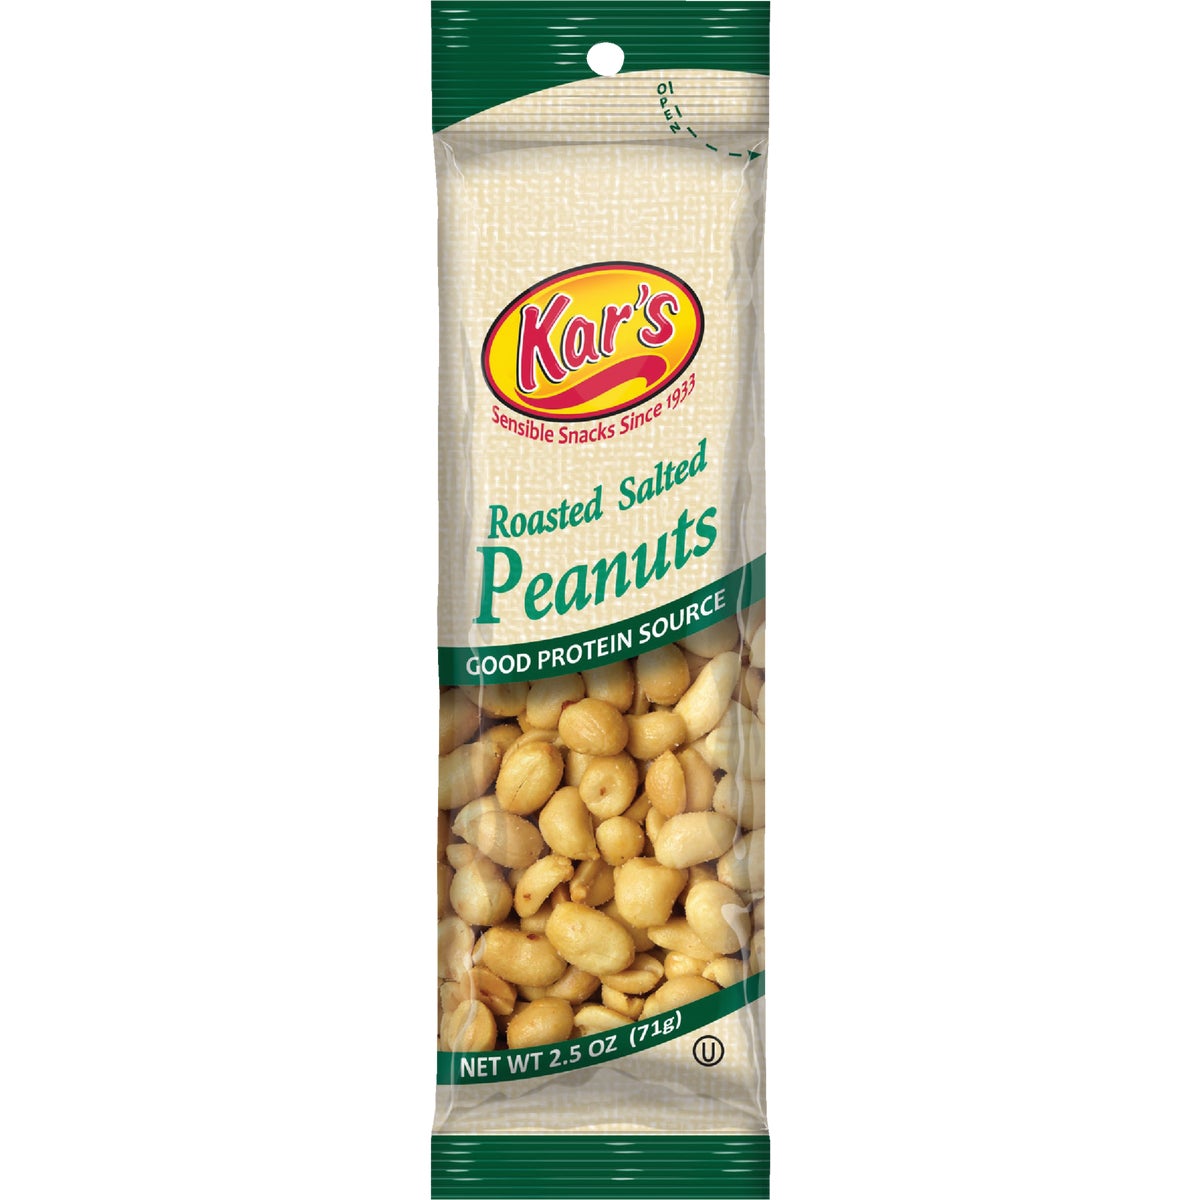 Item 970043, The American classic peanut what more needs to be said.